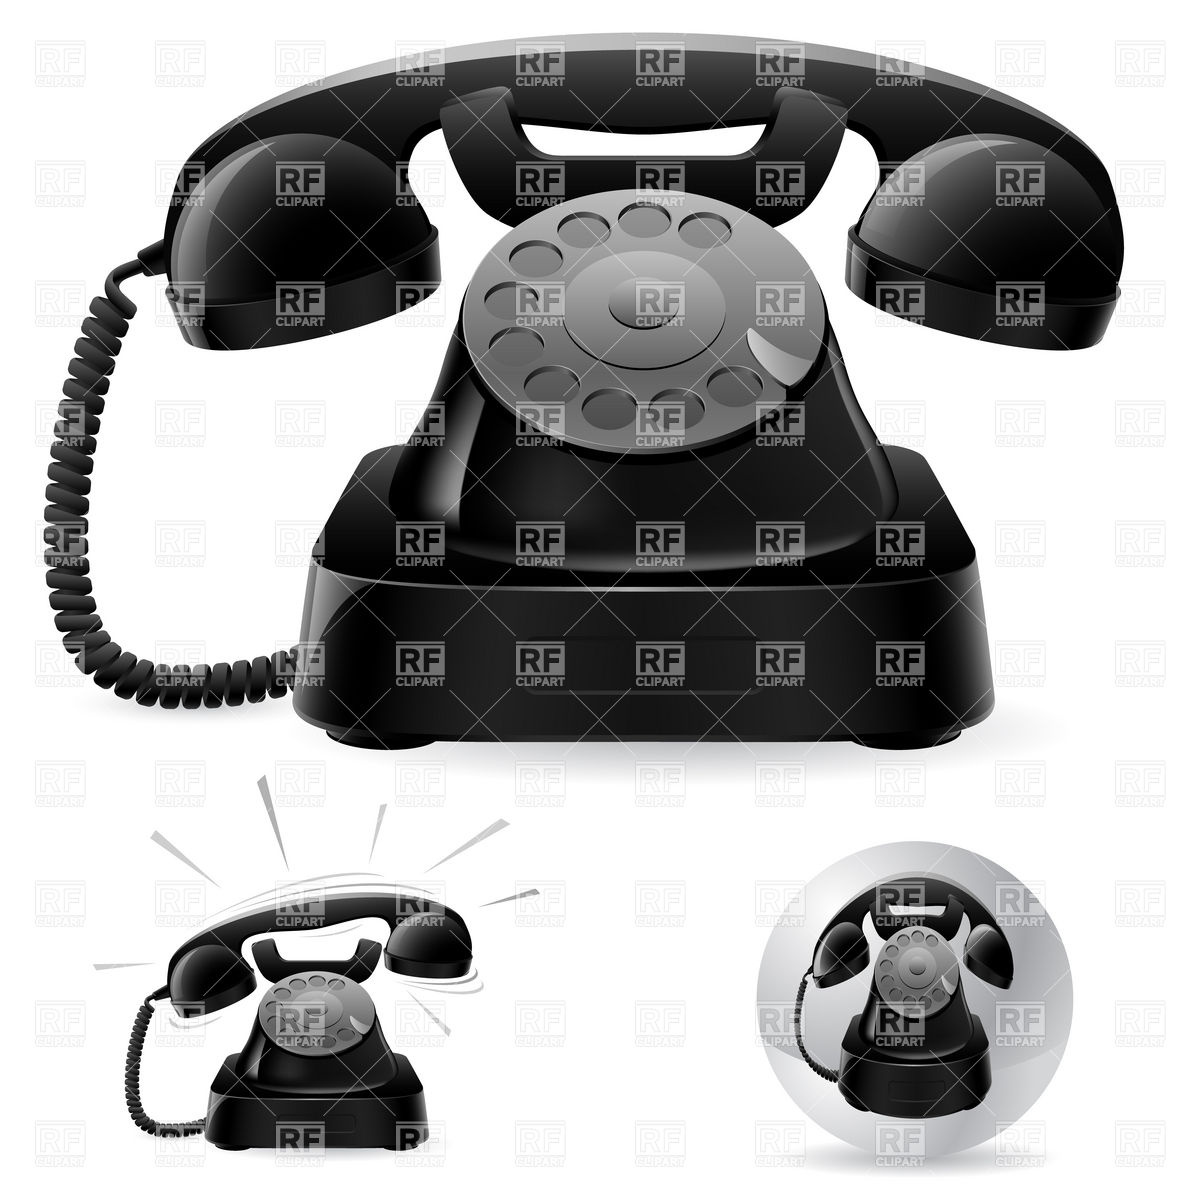 Old Black Dial Telephone Ringing Download Royalty Free Vector Clipart    